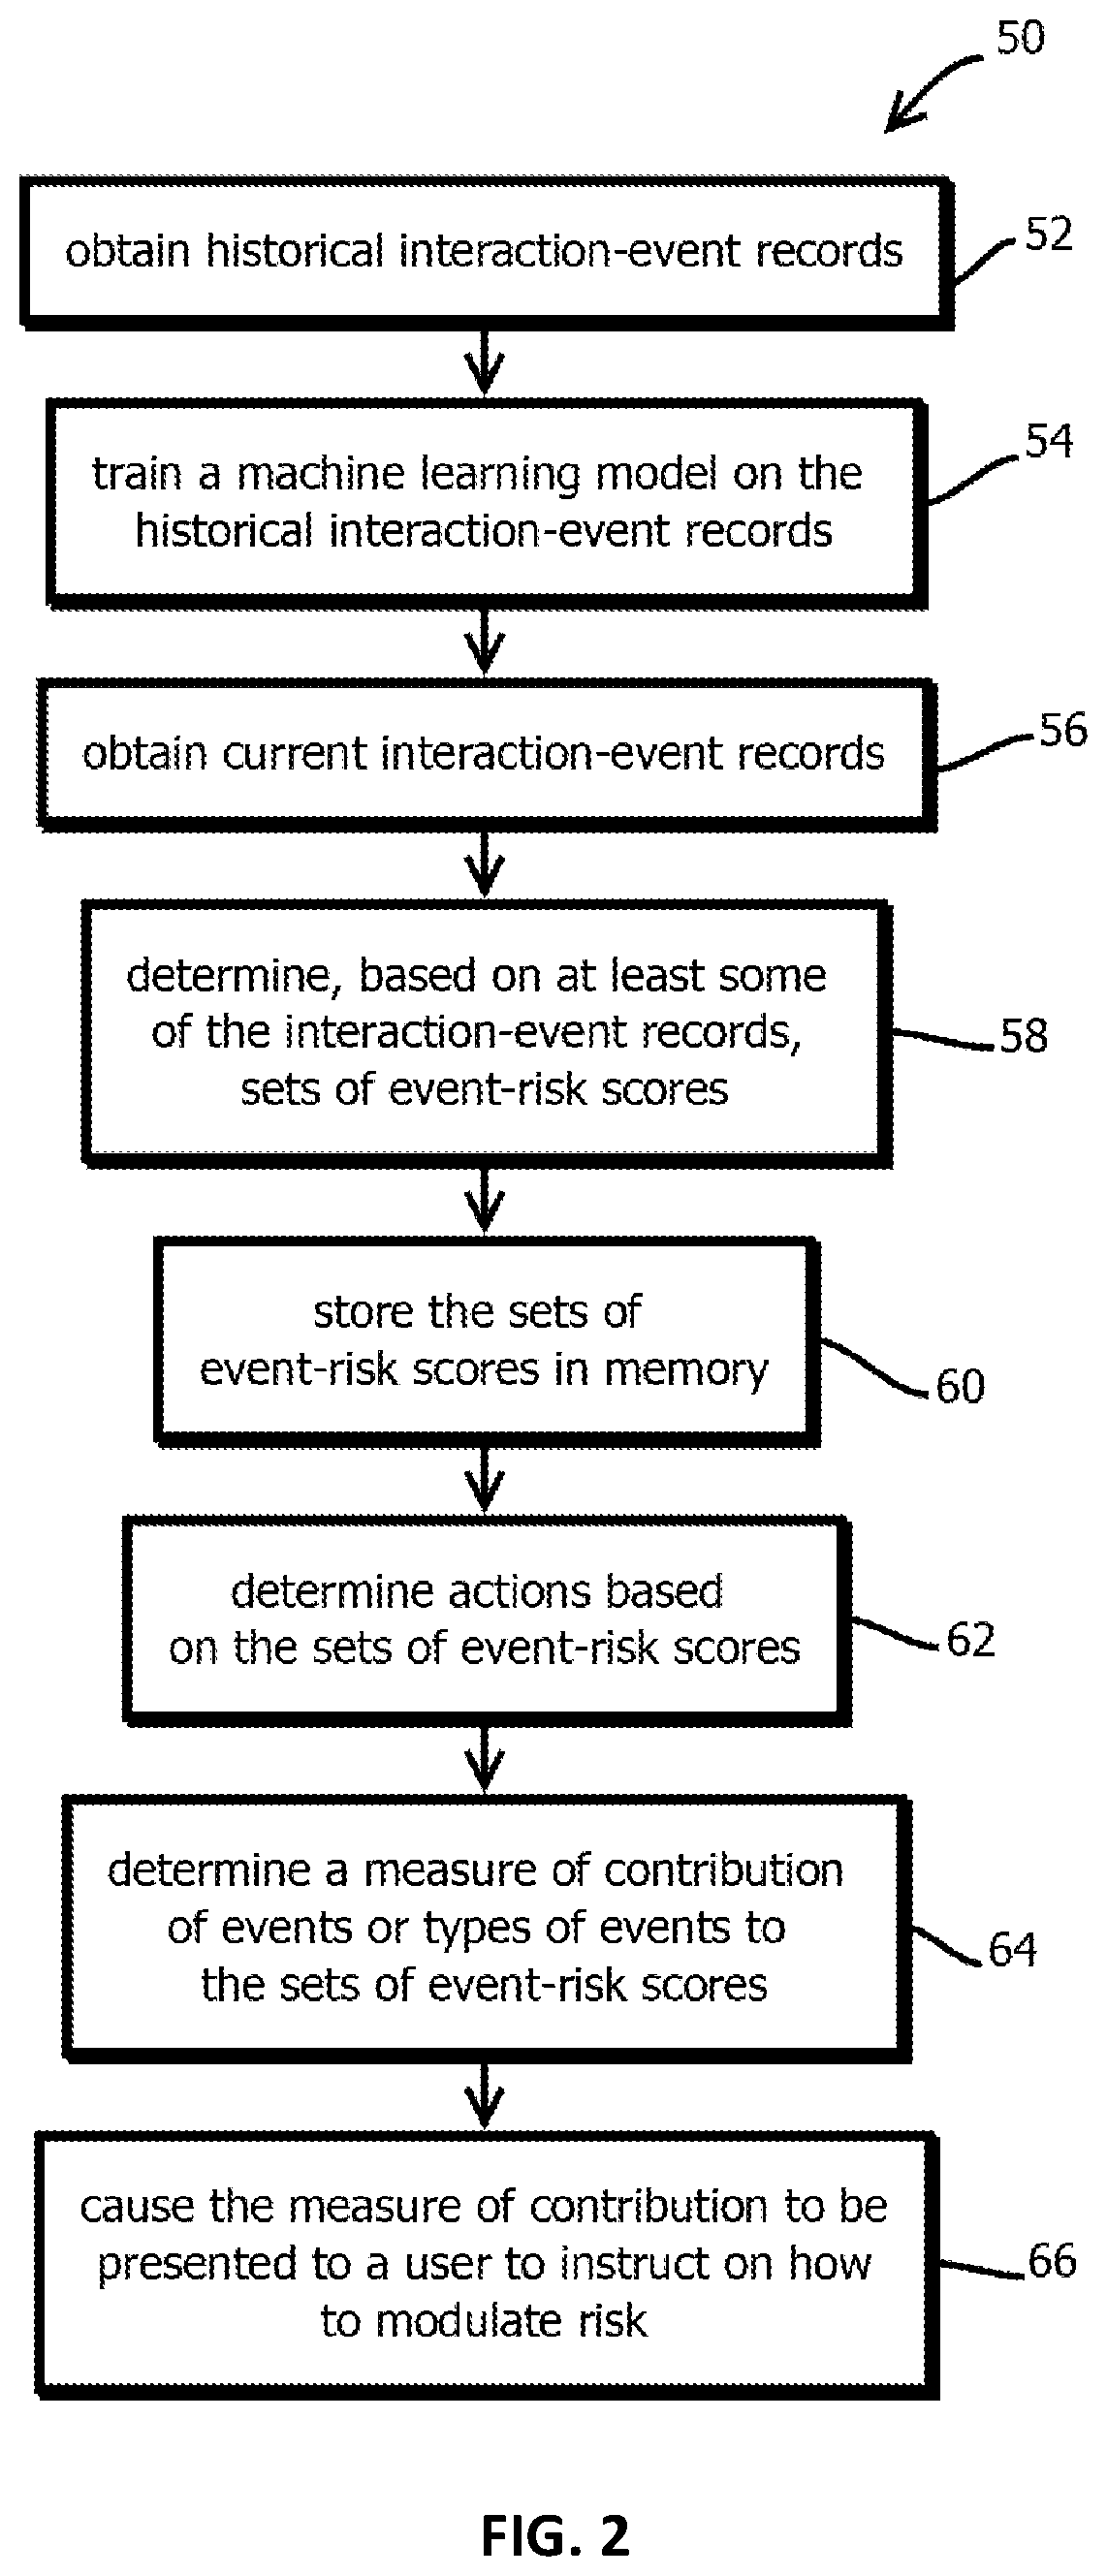 Monitoring and controlling continuous stochastic processes based on events in time series data